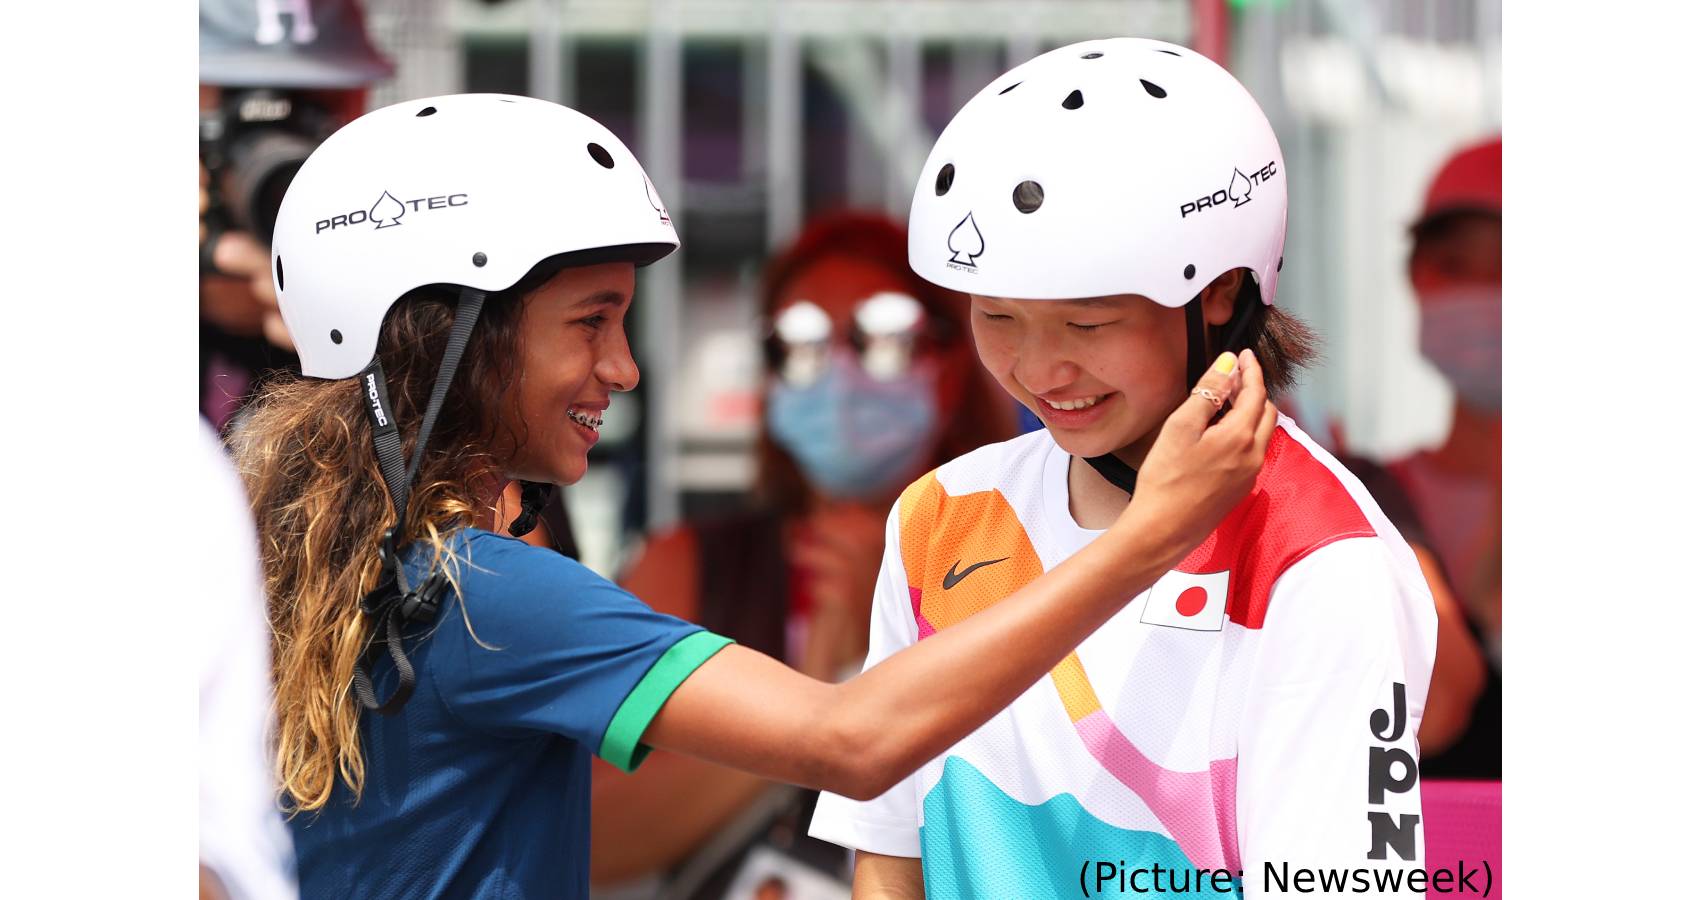 Two 13-Year-Old Skateboarders Are Stars Of Japan Olympics